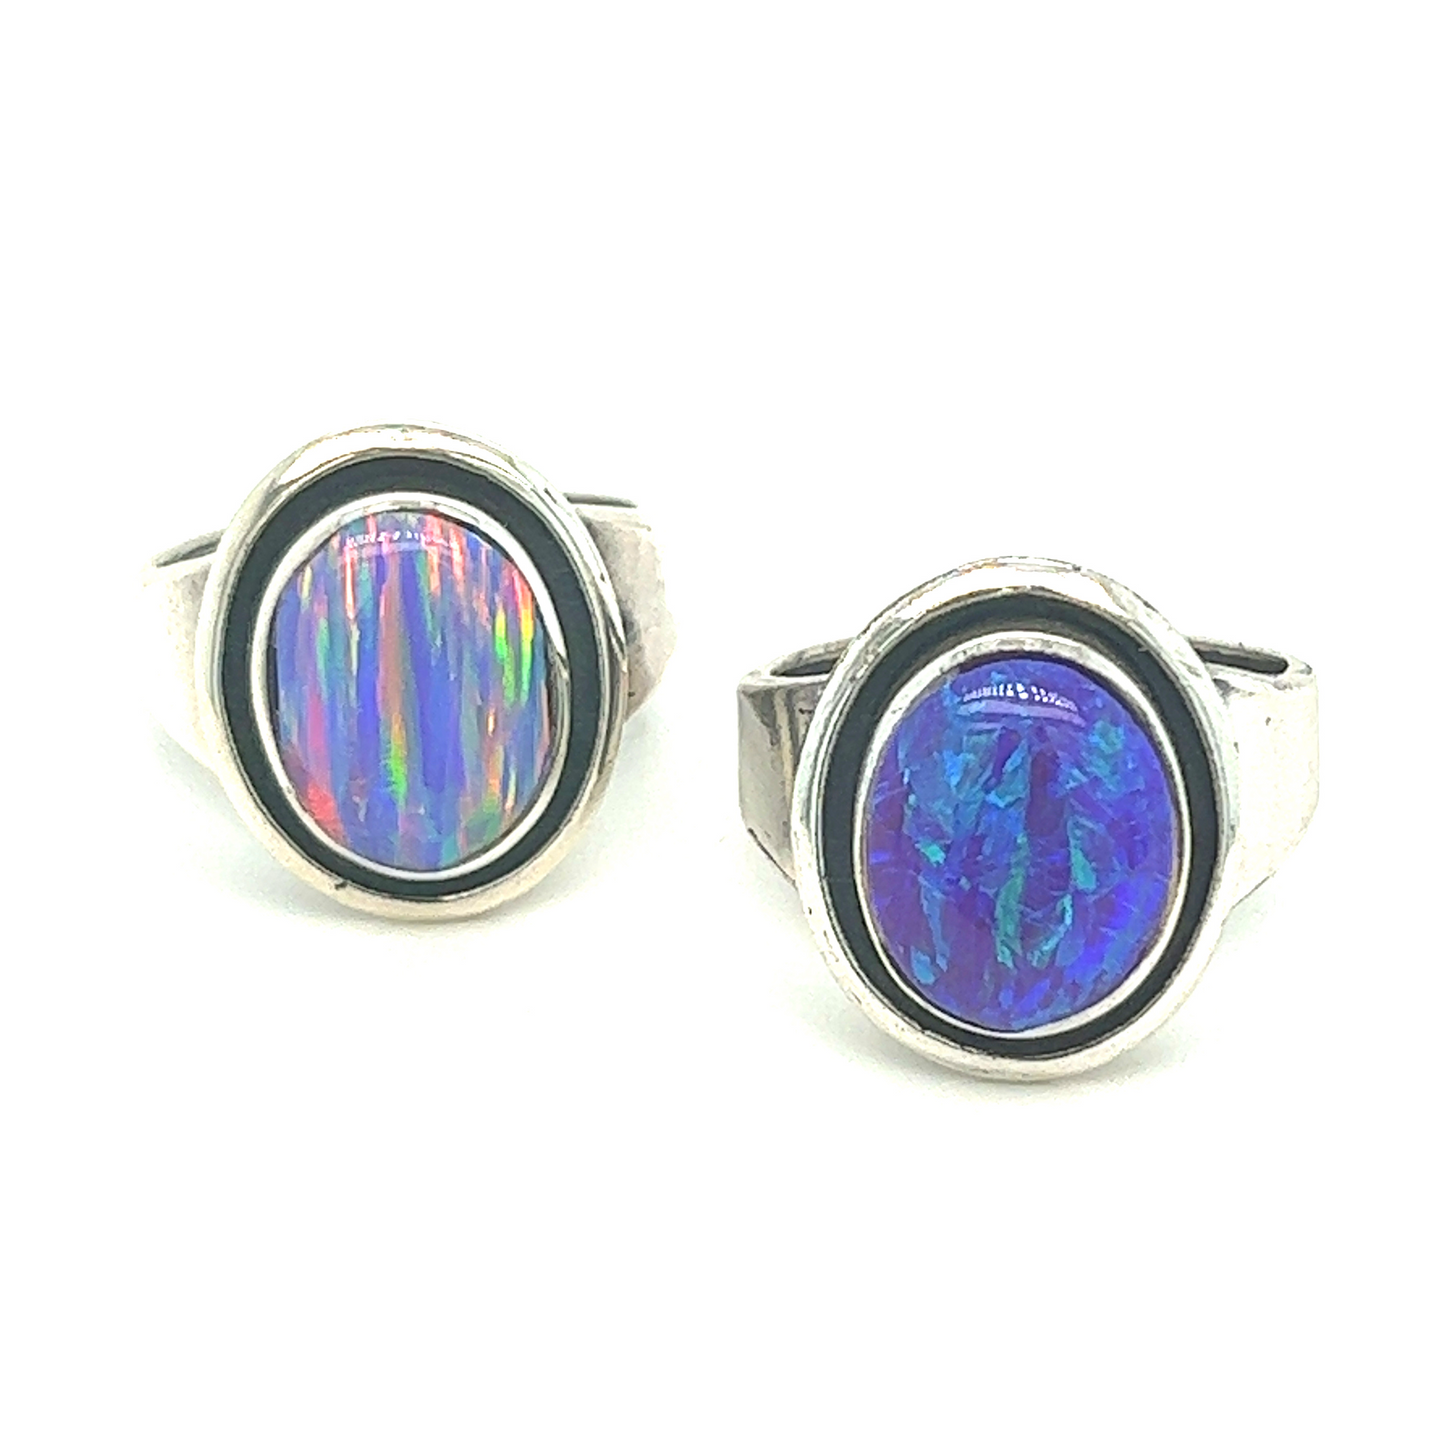 Two Radiant Opal Signet Rings with opal and blue opal stones.